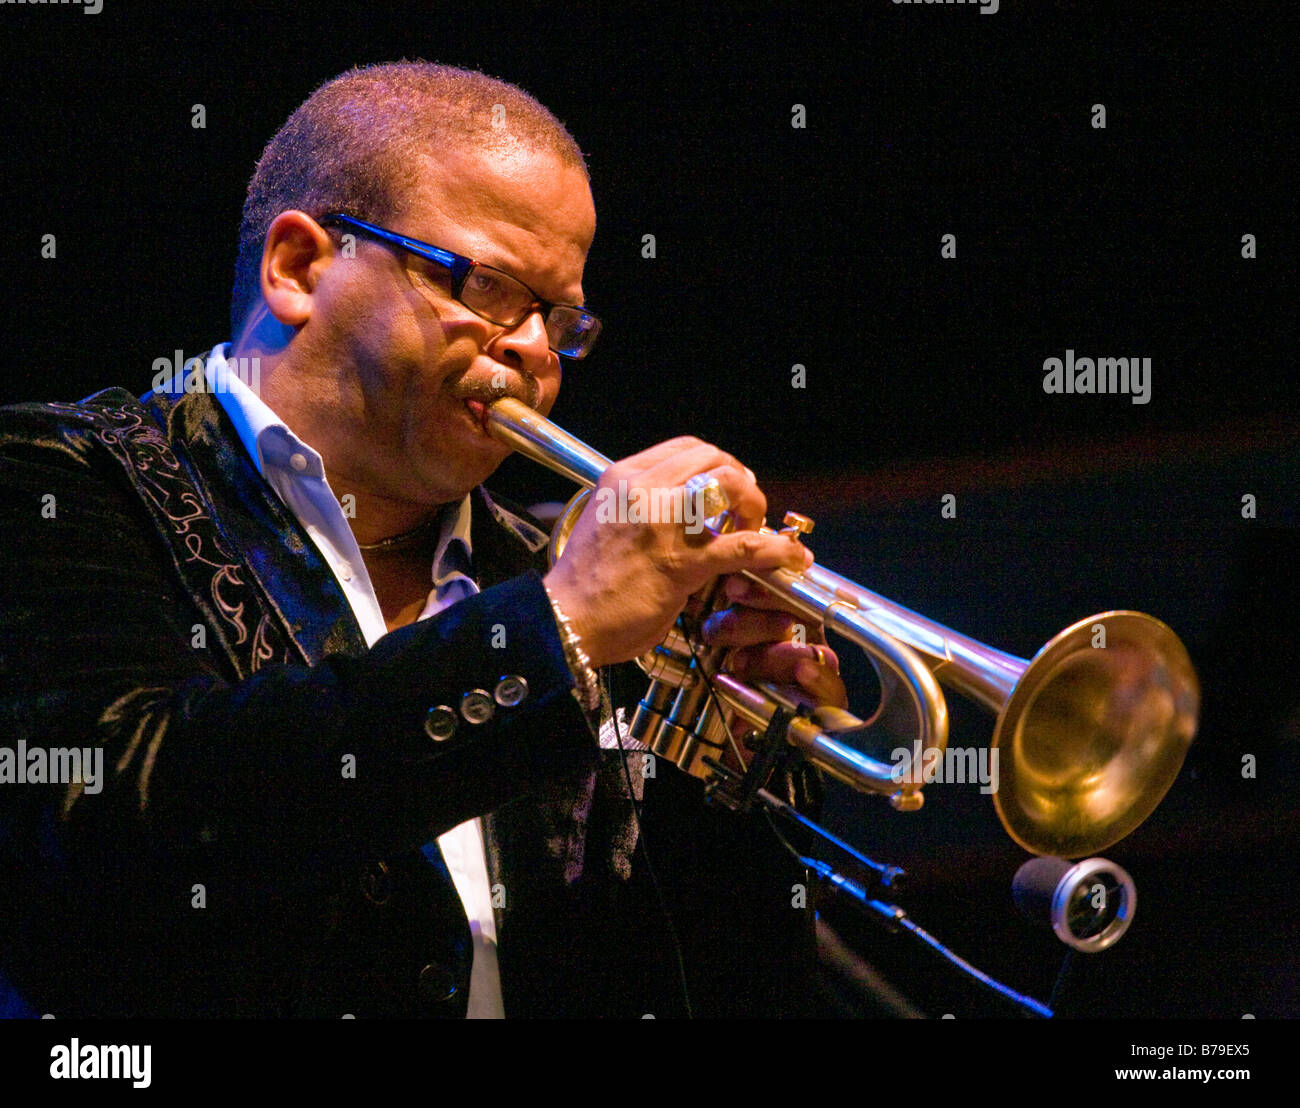 TERENCE BLANCHARD plays trumpet at the 51st MONTEREY JAZZ FESTIVAL MONTEREY CALIFORNIA Stock Photo